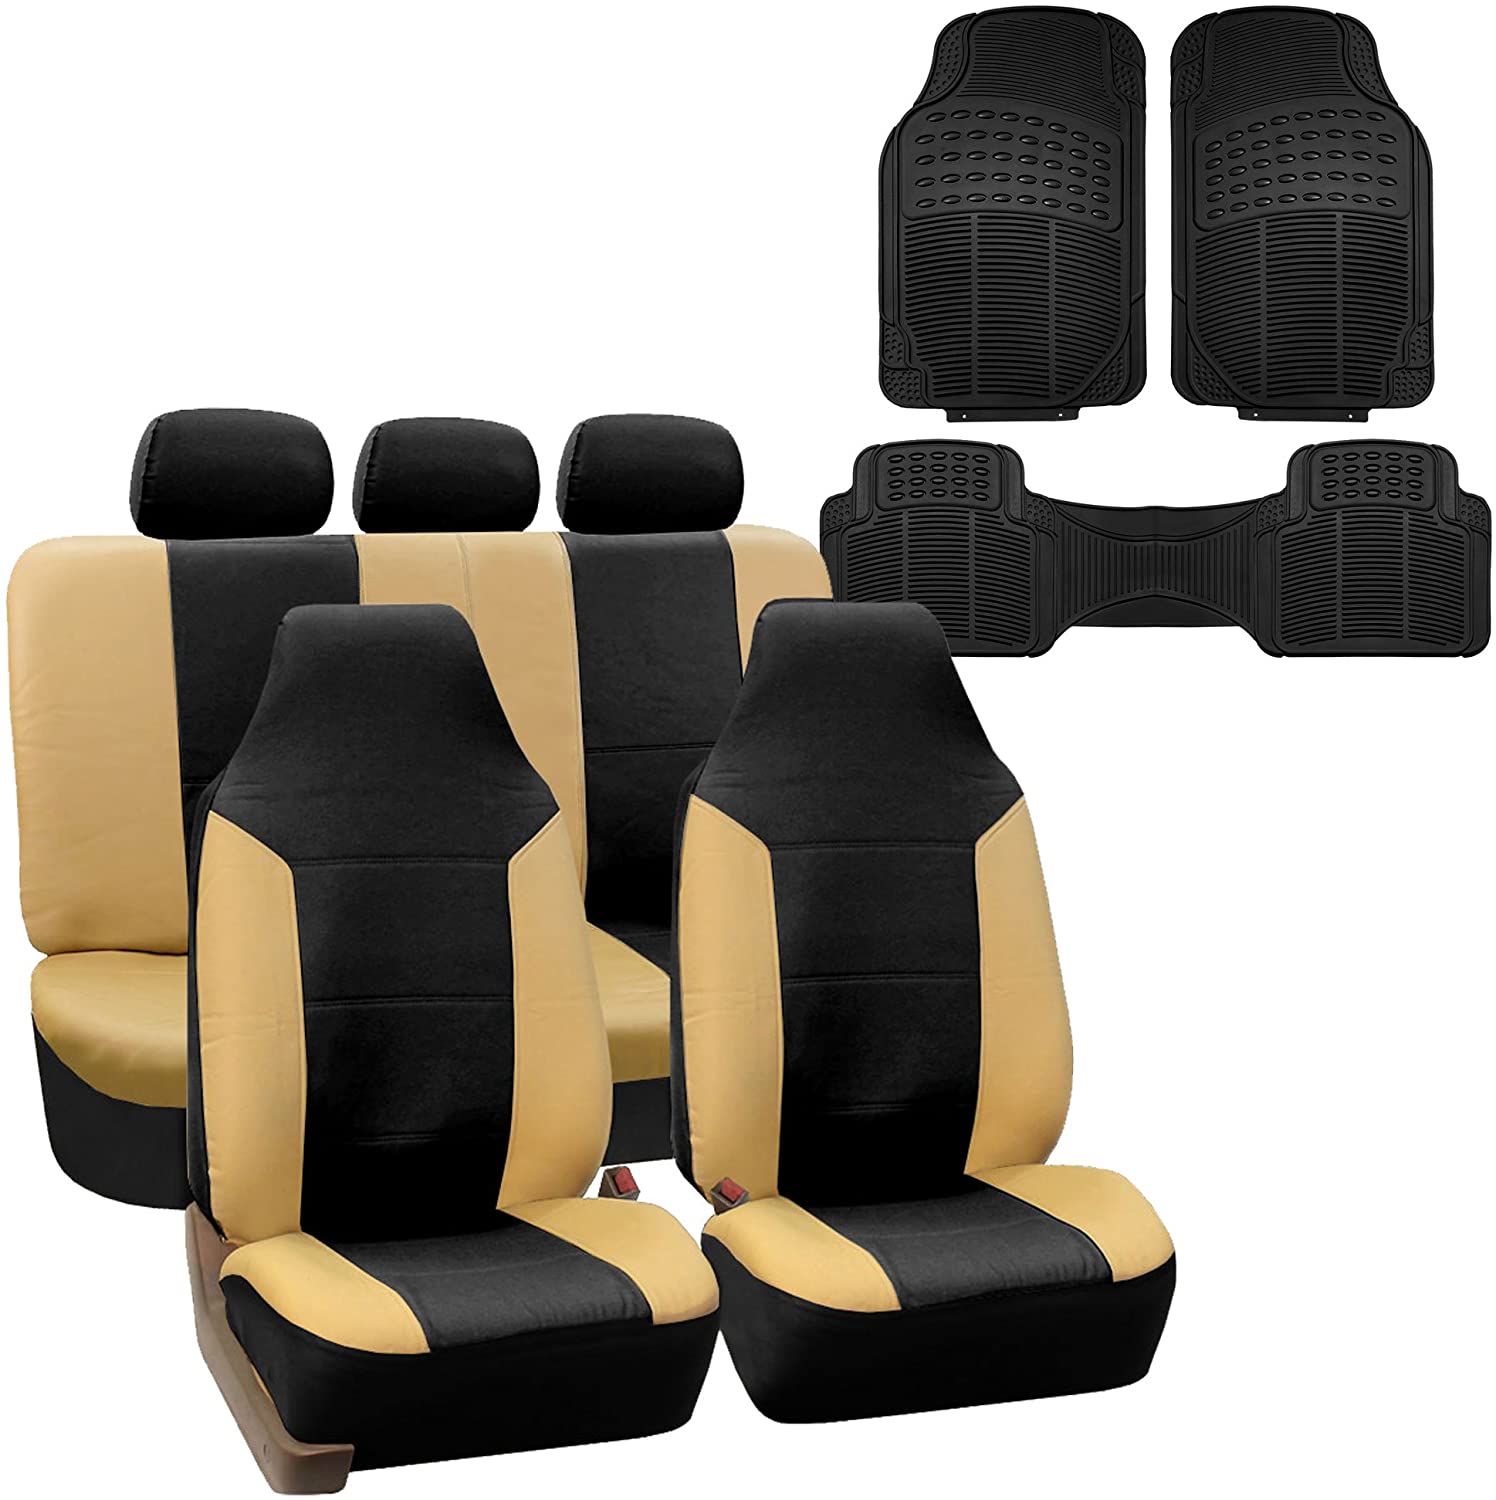 FH Group PU103115 Royal Leather Seat Covers (Black) + Trimmable Vinyl Car Floor Mats (Black) Full Set - Universal Fit for Cars, Trucks & SUVs